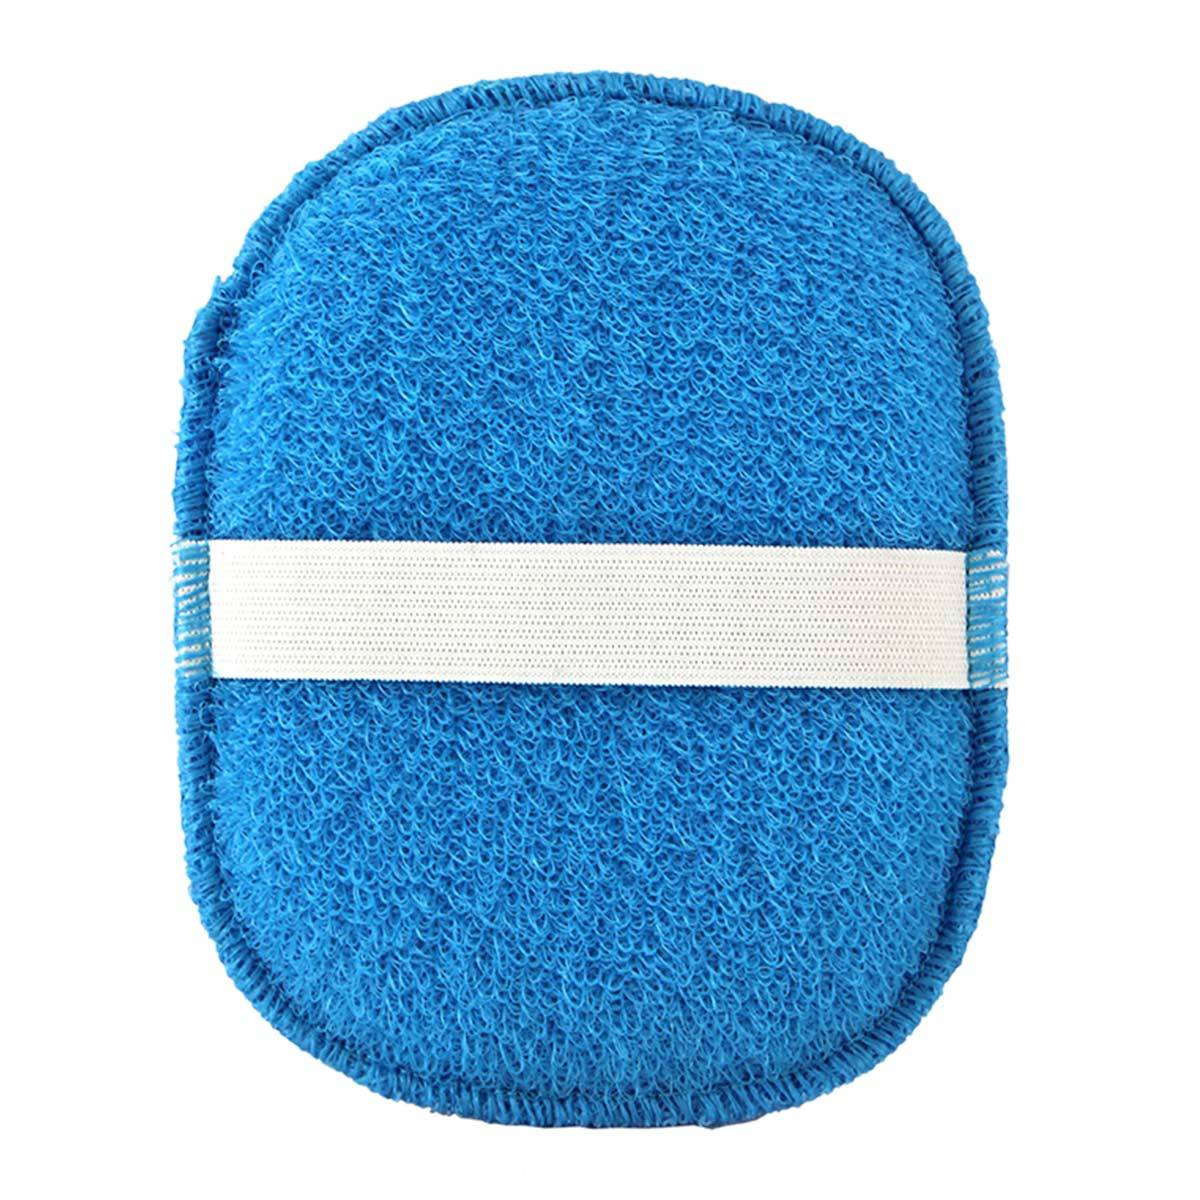 Primary image of Oval Massage Sponge with Strap